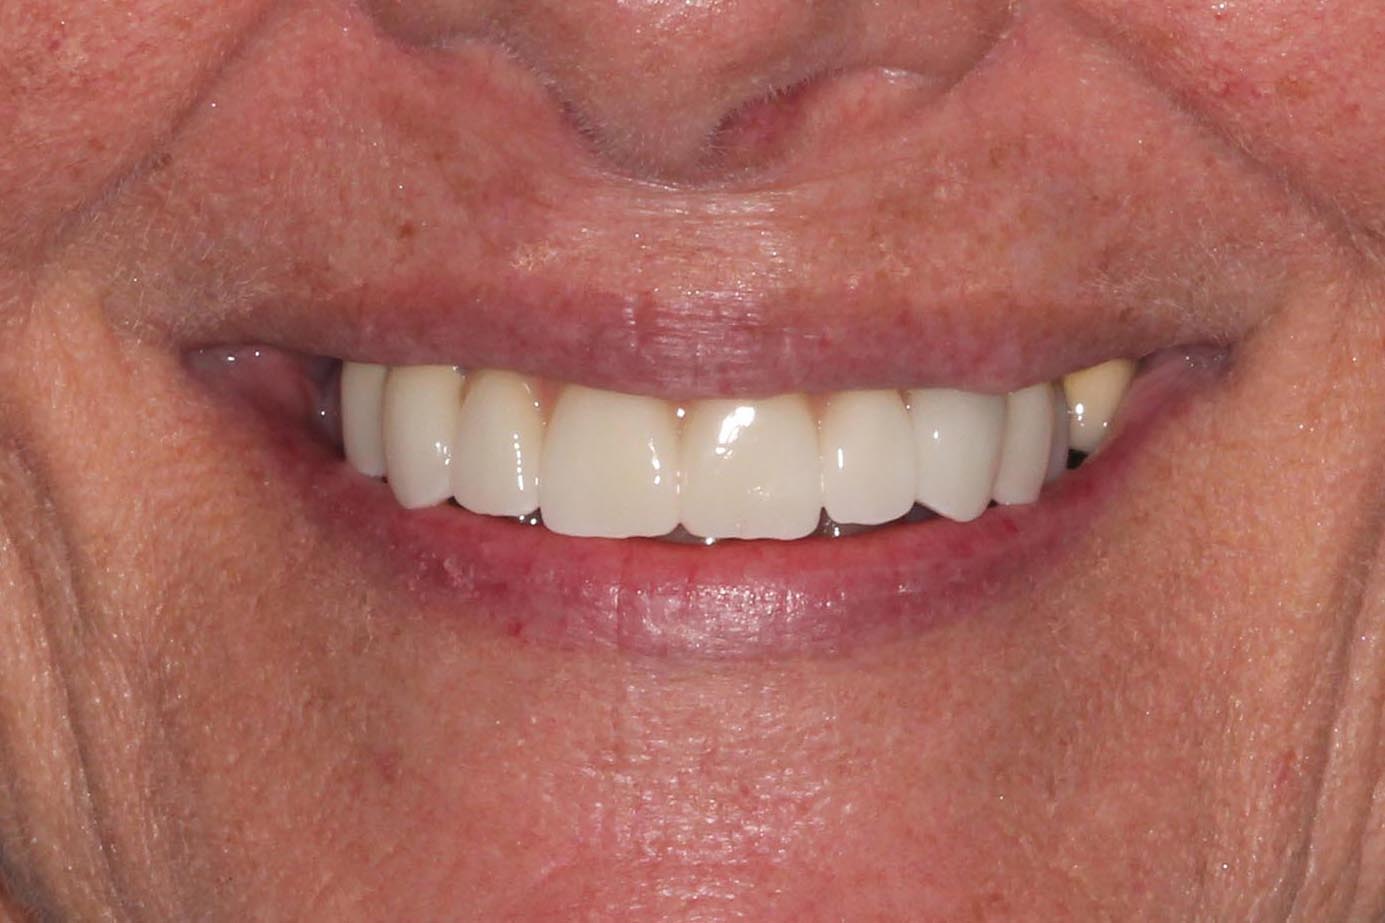 Applied limited care, esthetics to teeth